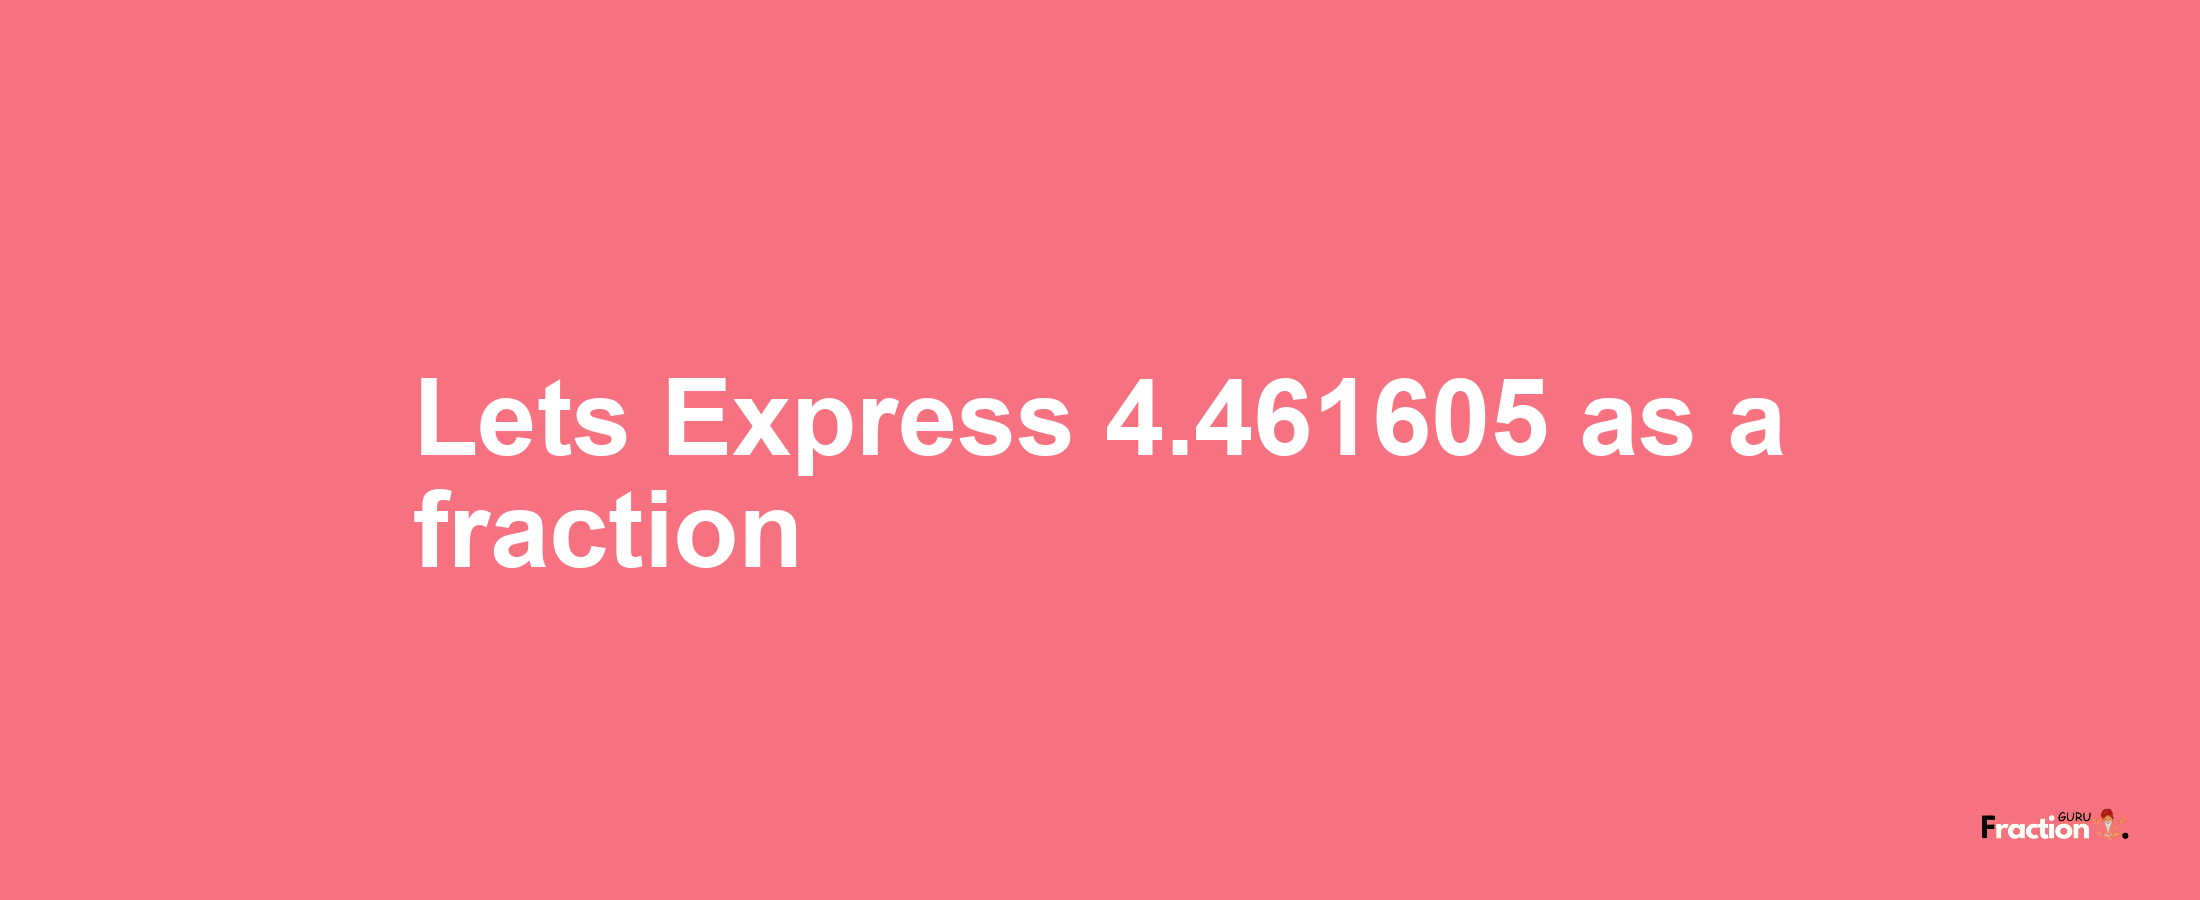 Lets Express 4.461605 as afraction